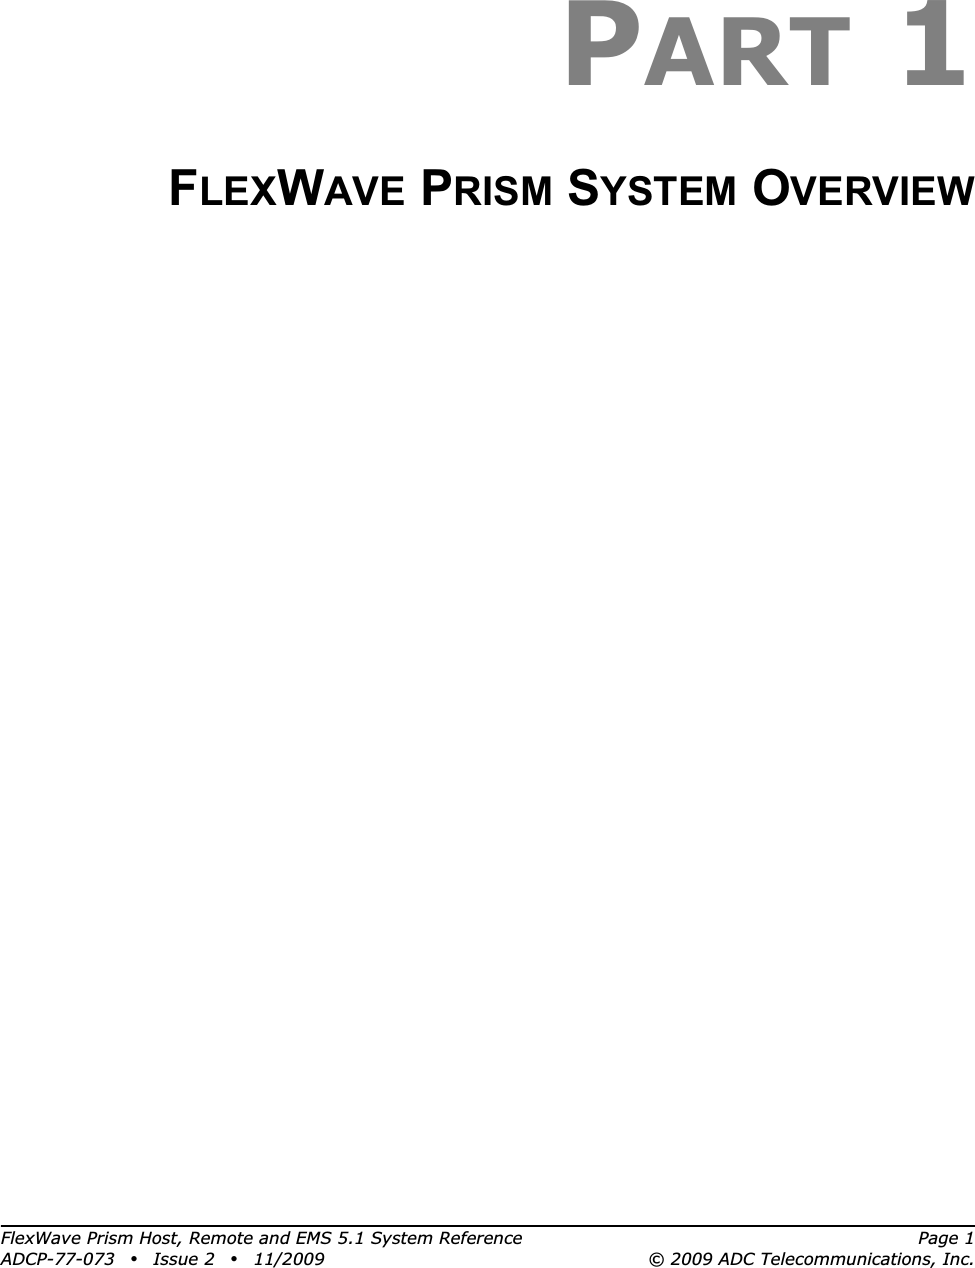 FlexWave Prism Host, Remote and EMS 5.1 System Reference Page 1ADCP-77-073 • Issue 2 • 11/2009 © 2009 ADC Telecommunications, Inc.PART 1FLEXWAVE PRISM SYSTEM OVERVIEW